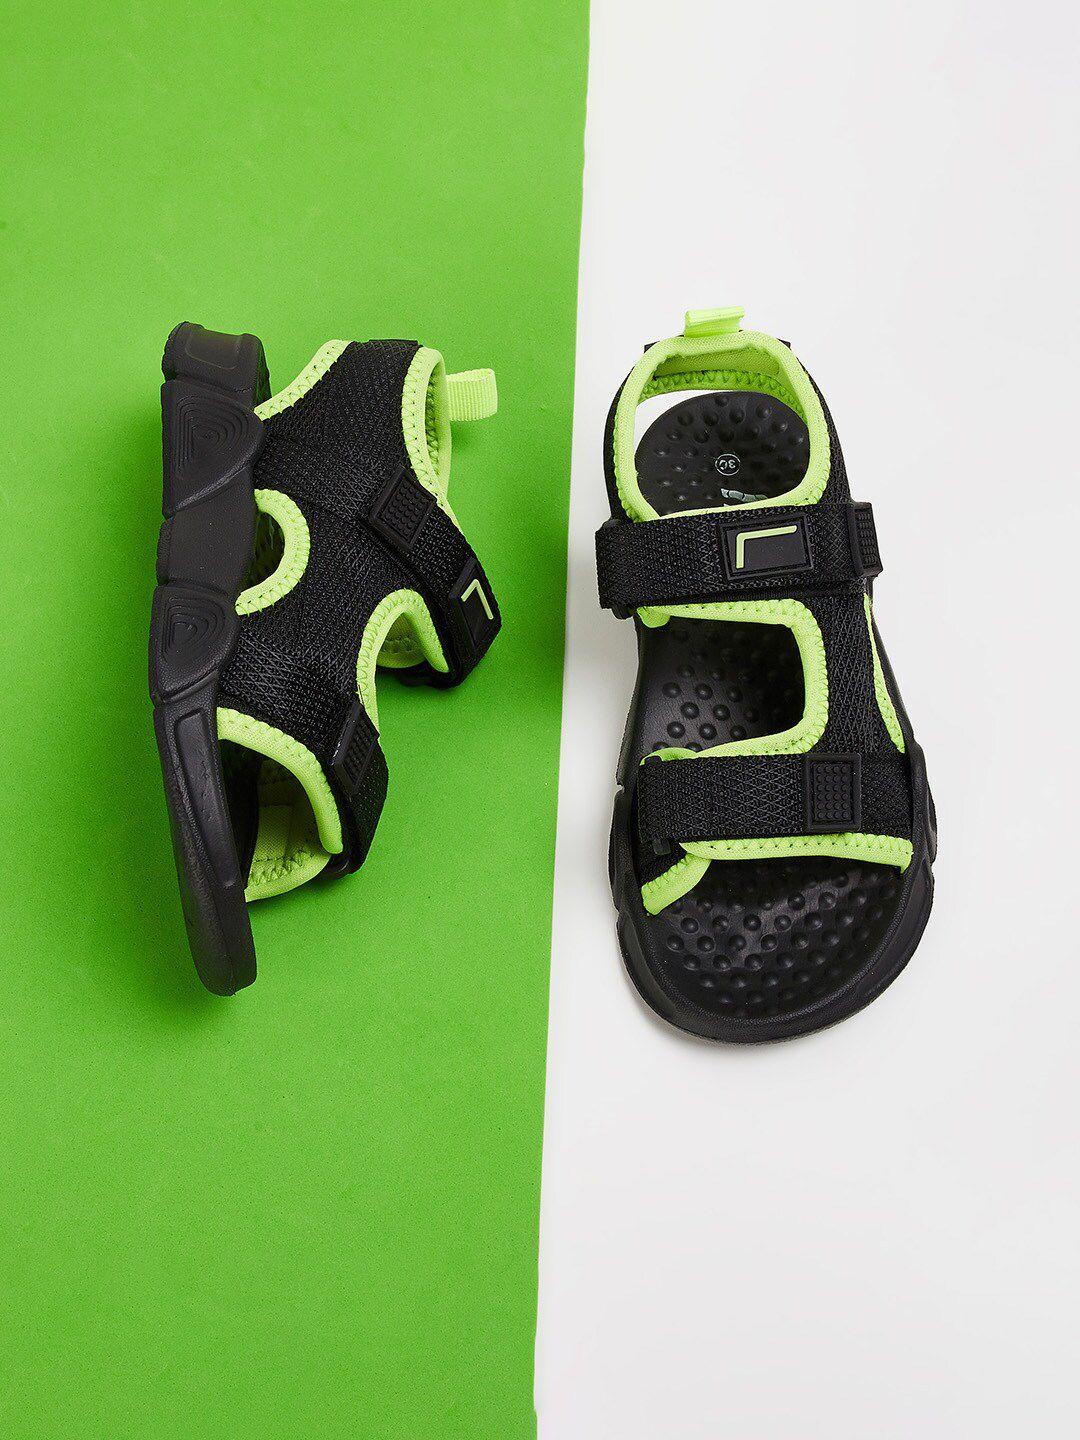 fame-forever-by-lifestyle-boys-velcro-comfort-sandals